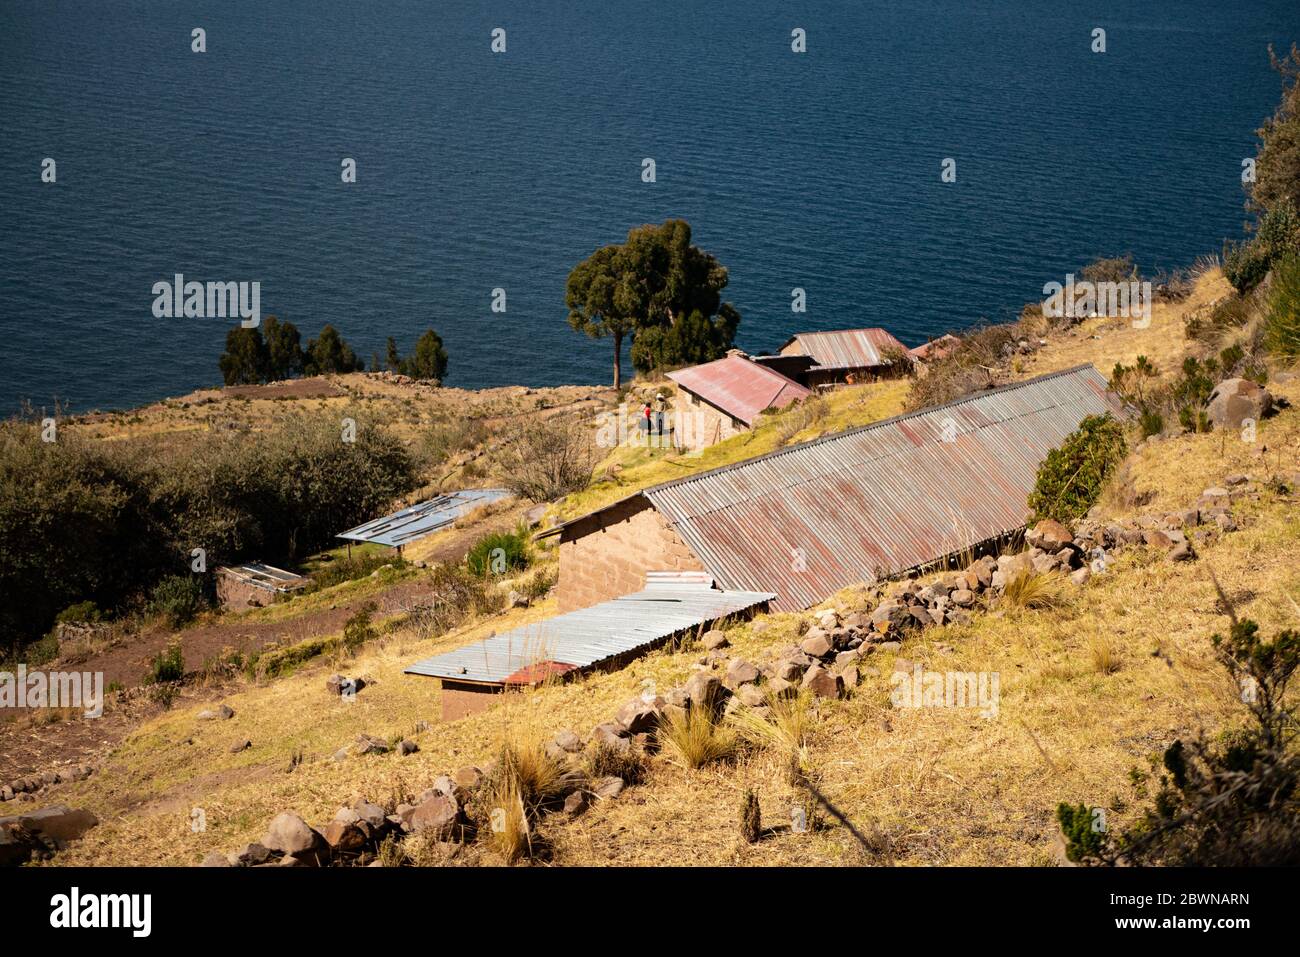 The view on one of the local houses on the terraced slope of Taquile Island with Lake Titicaca in the background. Stock Photo